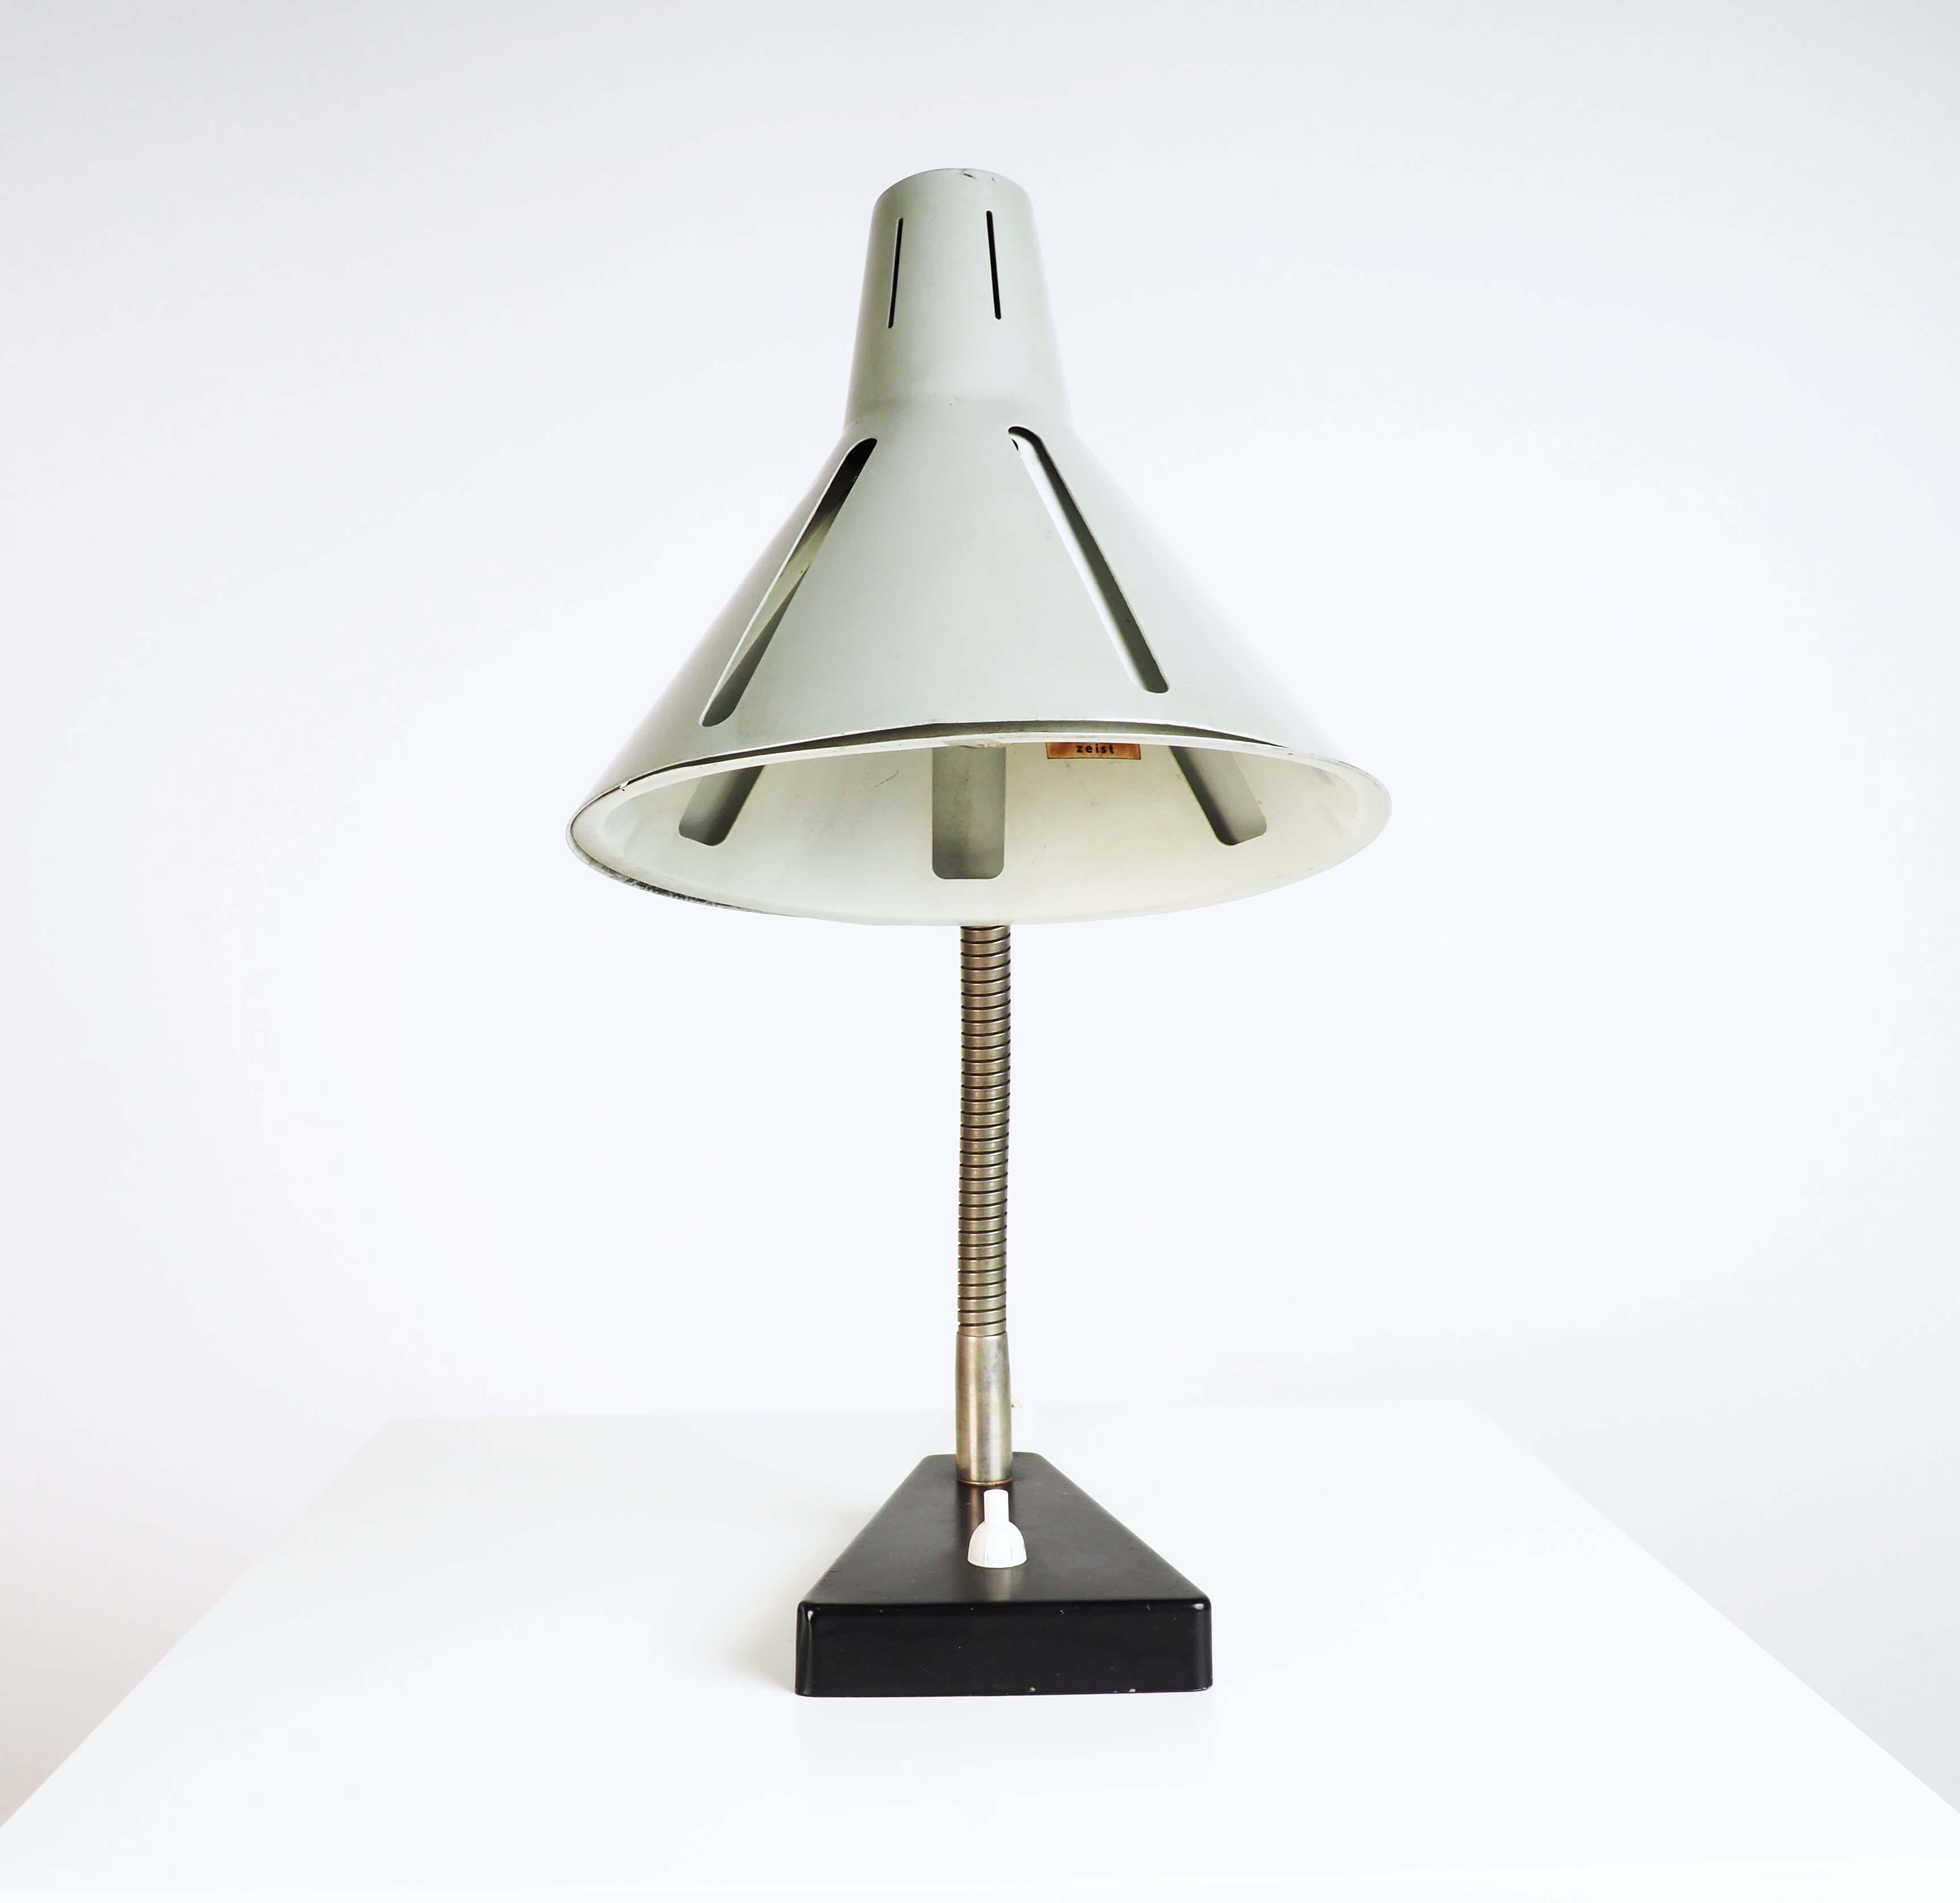 Table lamp by H. Busquet from Hala Zeist, Netherlands. Made in the 1950s as part of a series of lamps called 